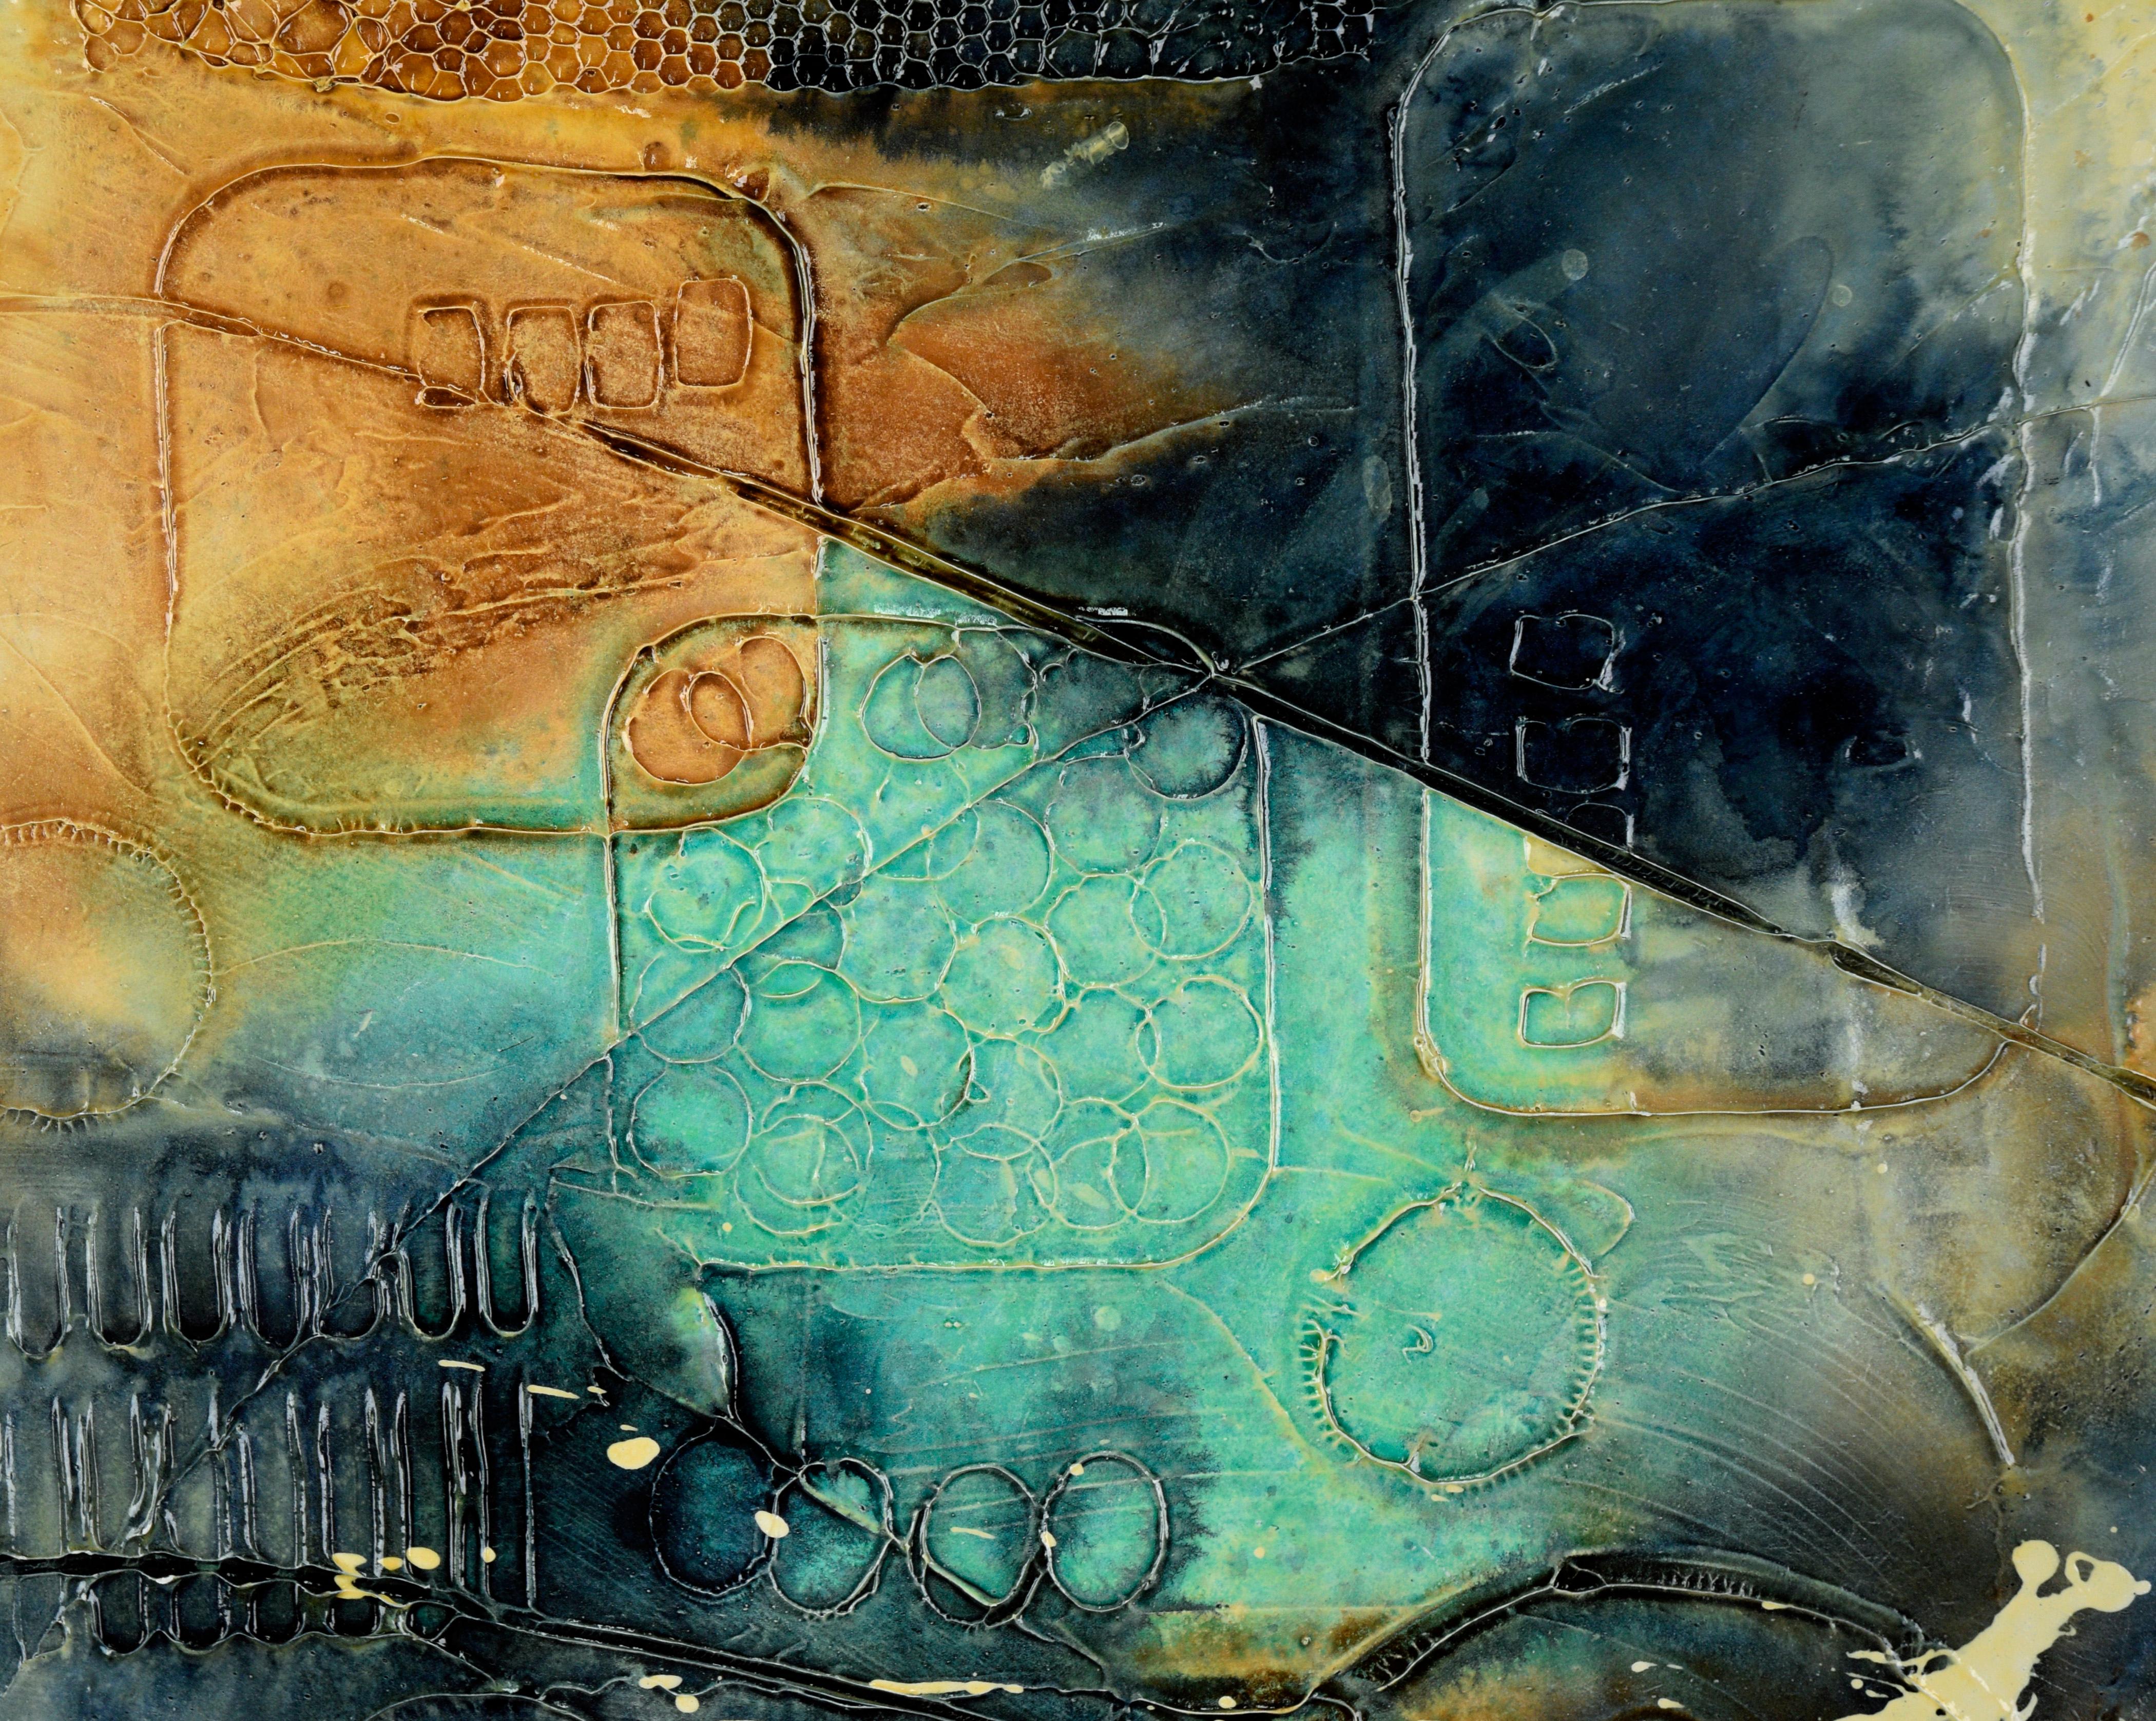 Textured Abstract Expressionist Composition in Acrylic on Board

Textured and detailed abstract composition by Loretta Burton Youngman (American, b. 1943). Teal and charcoal blue patches sit atop a yellow and tan background. There are overlapping